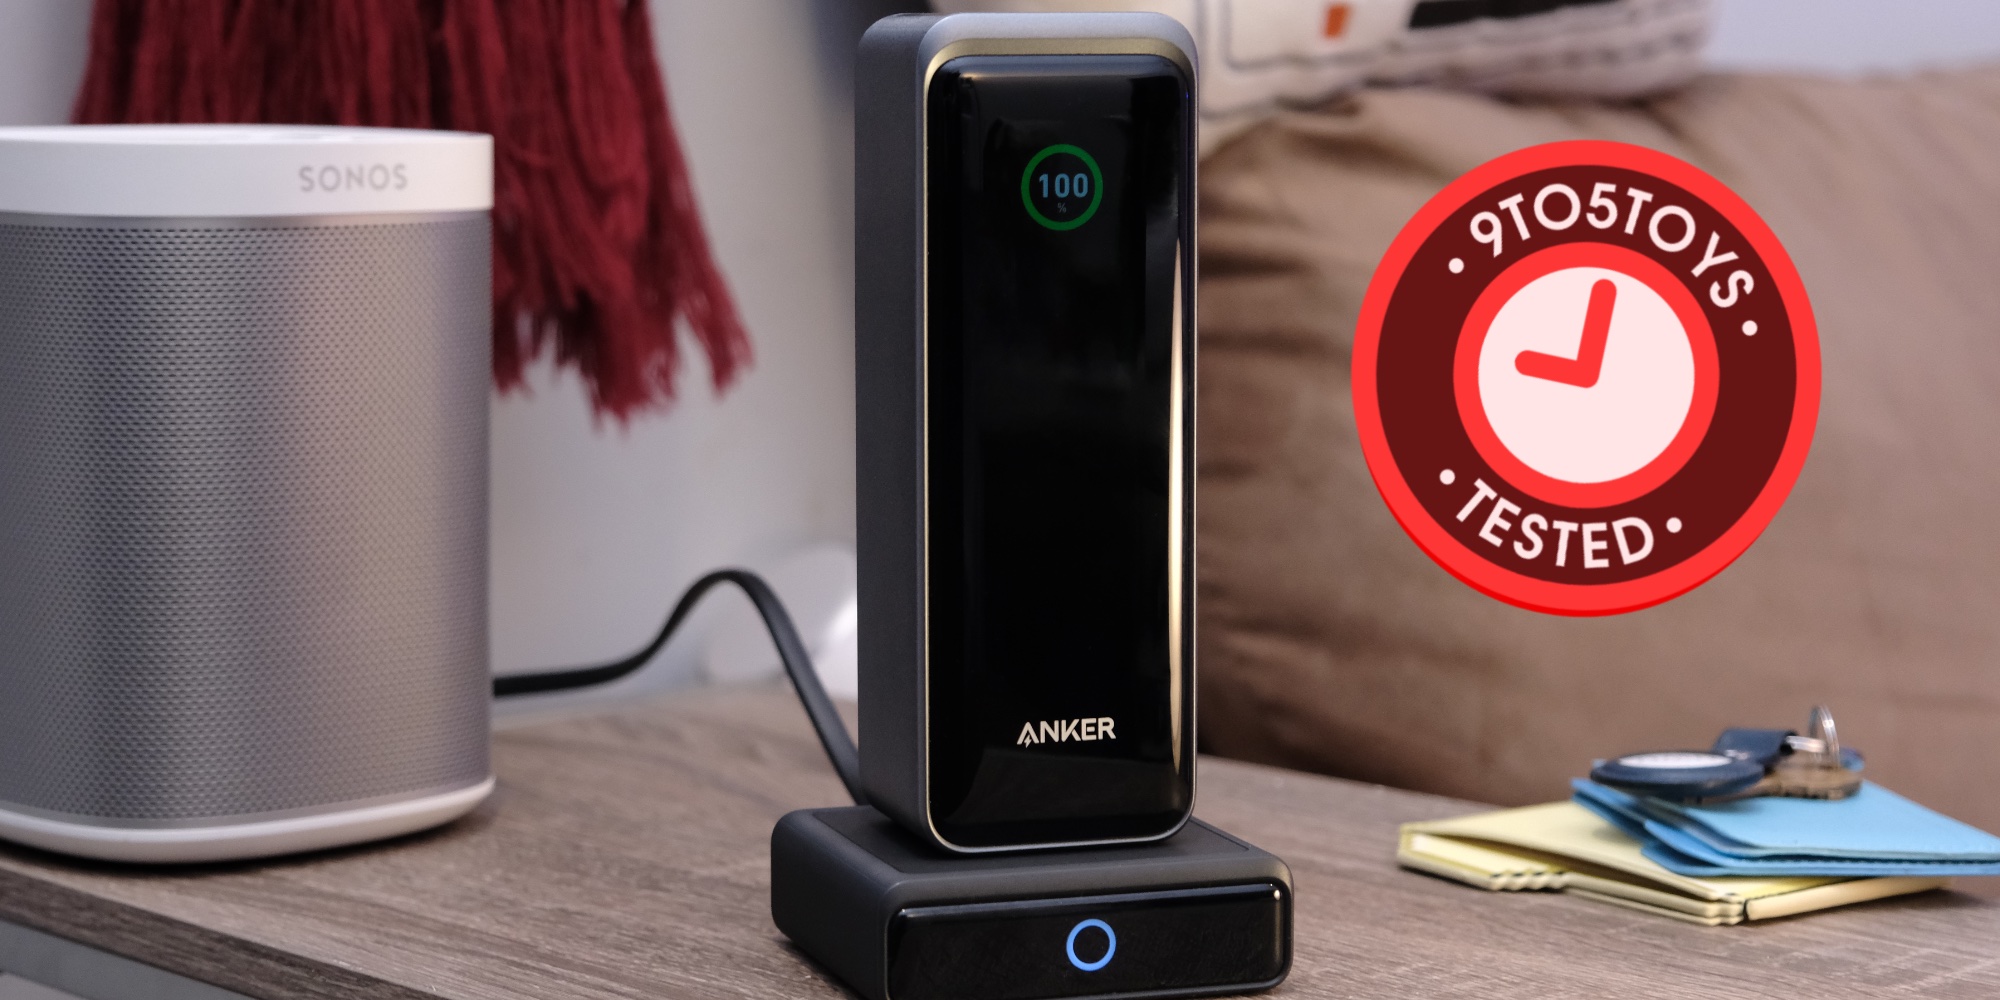 Anker Prime 20,000 mAh hands-on review: Large high-performance power bank  with helpful display -  Reviews